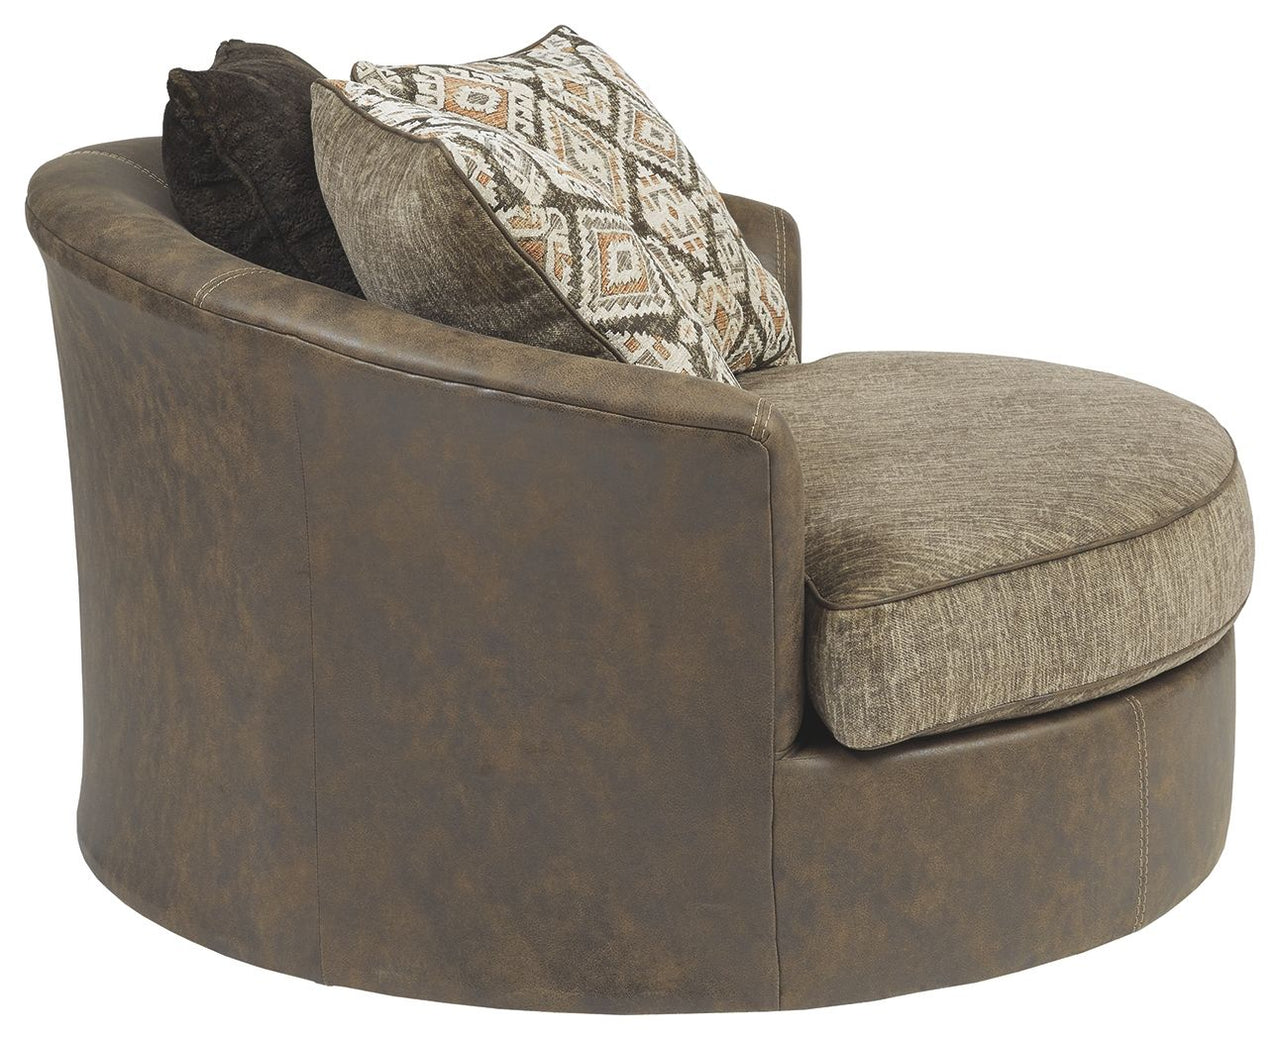 Abalone - Chocolate - Oversized Swivel Accent Chair - Tony's Home Furnishings